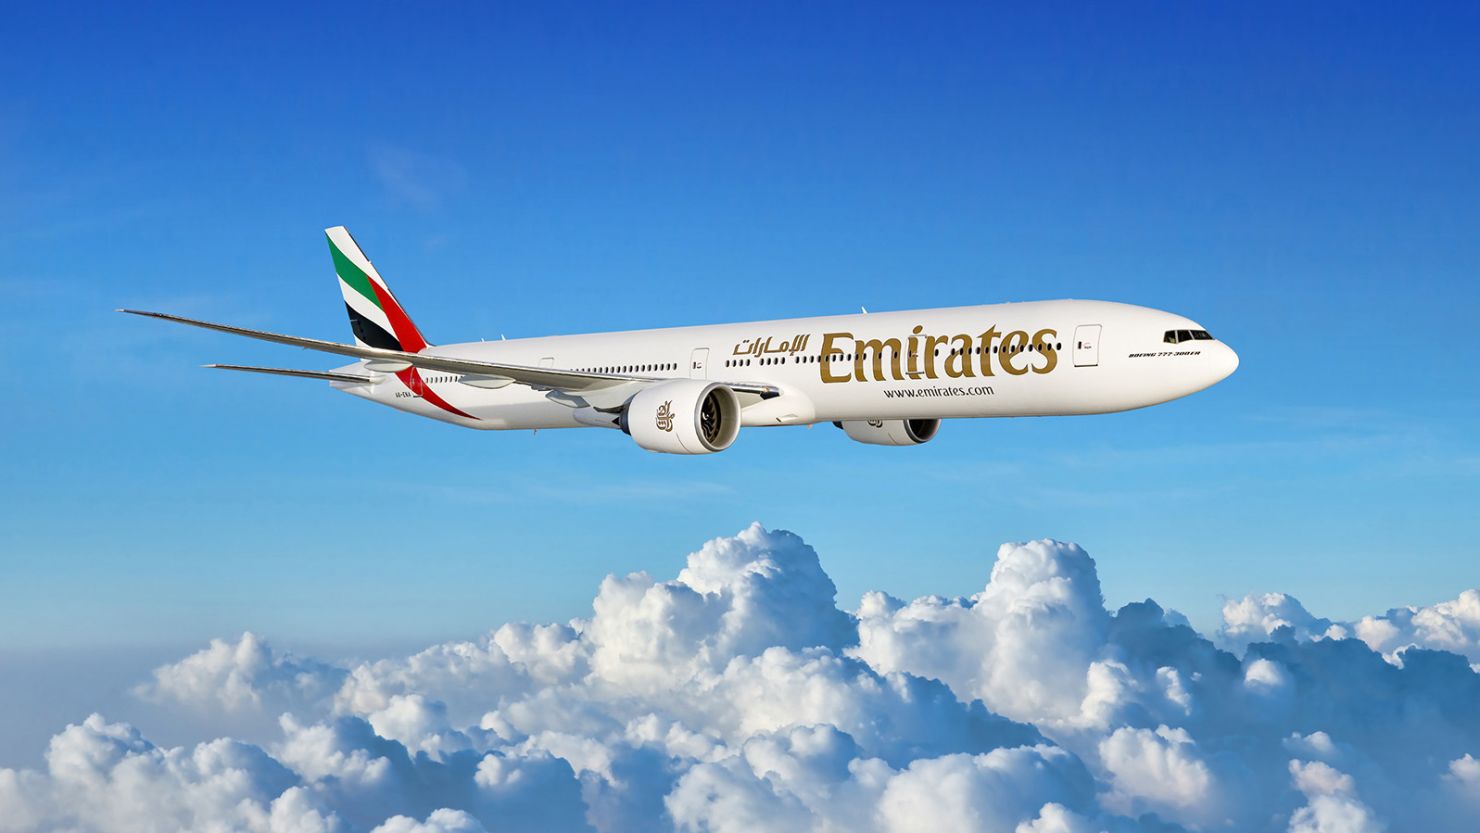 One of the aircraft was an Emirates airline plane, according to a statement issued by the Bahraini Foreign Ministry.